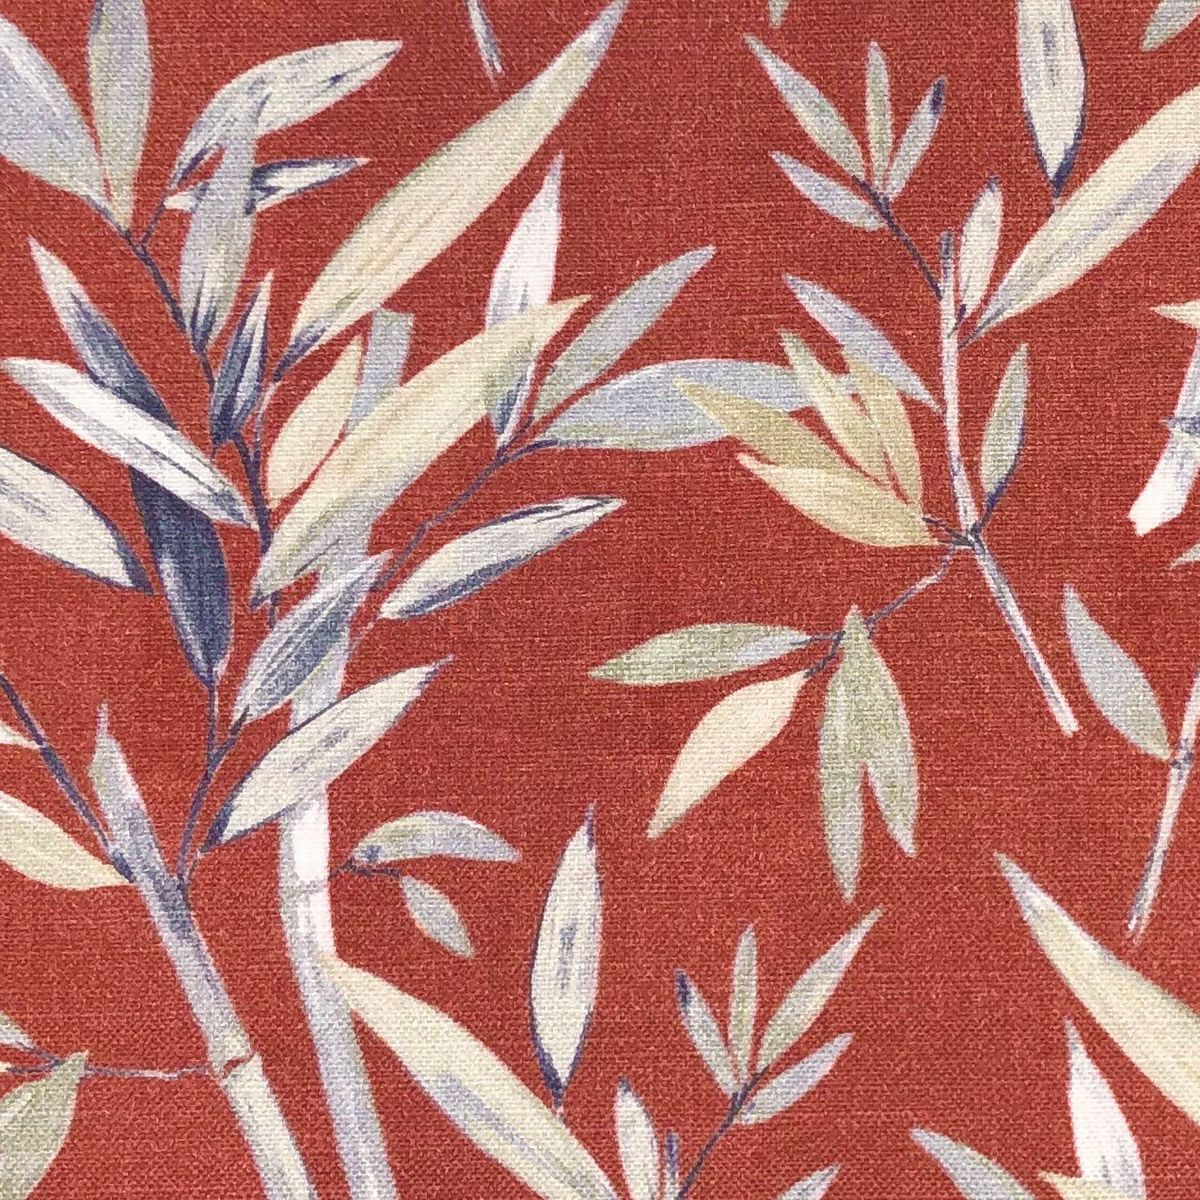 Jardin Colvelly Russet Fabric by Chatham Glyn